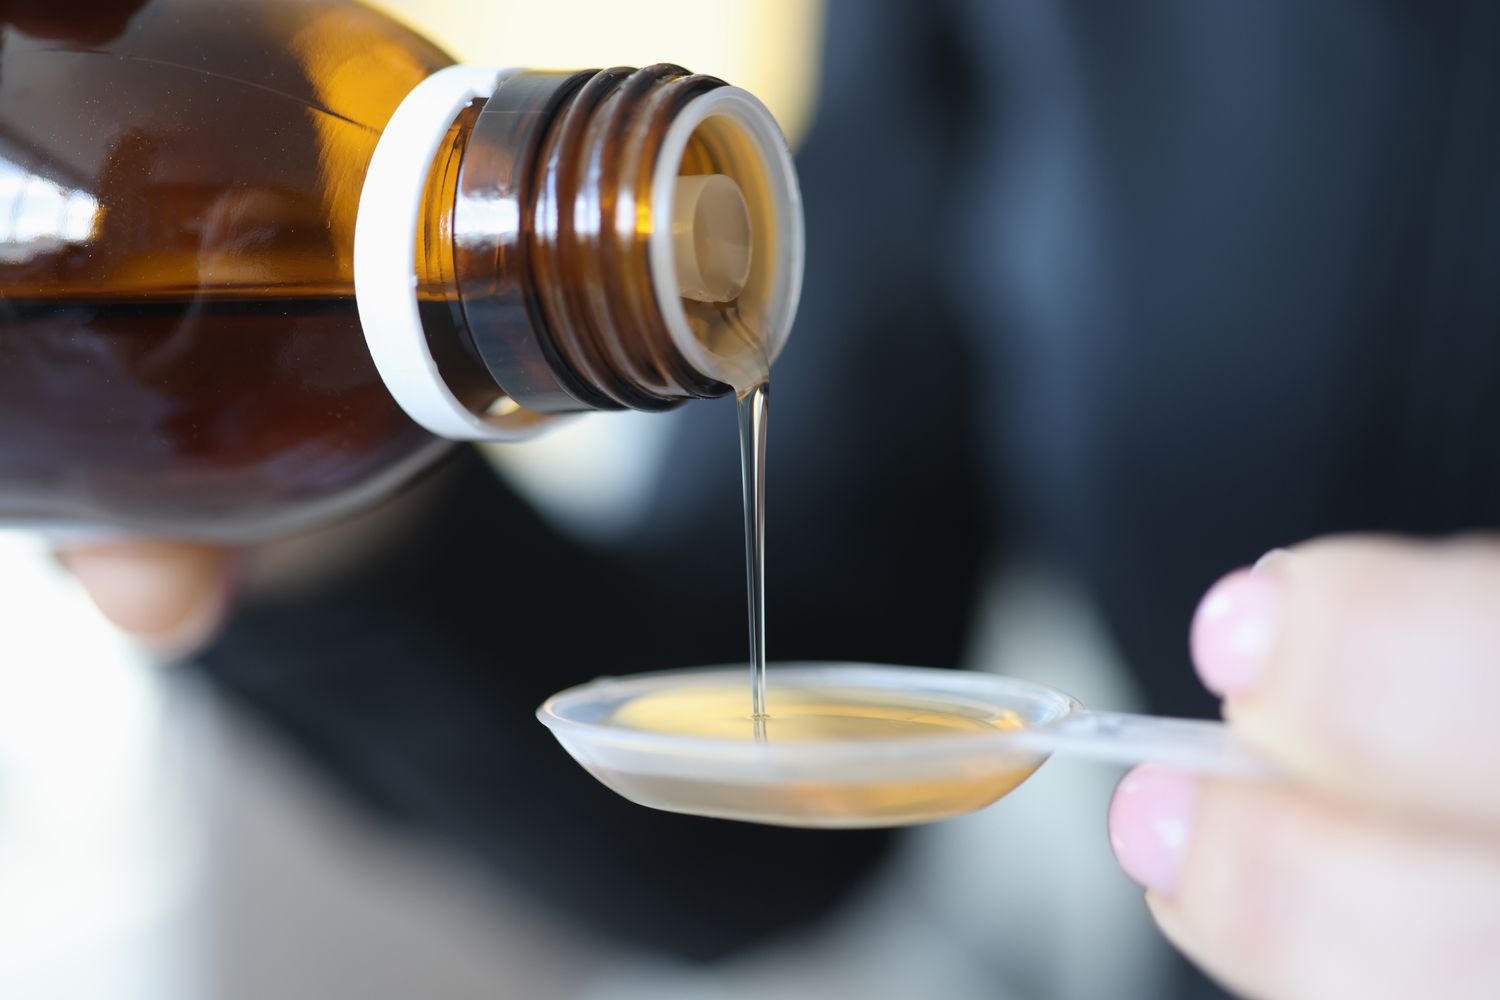 thc syrup, a transparent light brown liquid poured onto a plastic spoon.